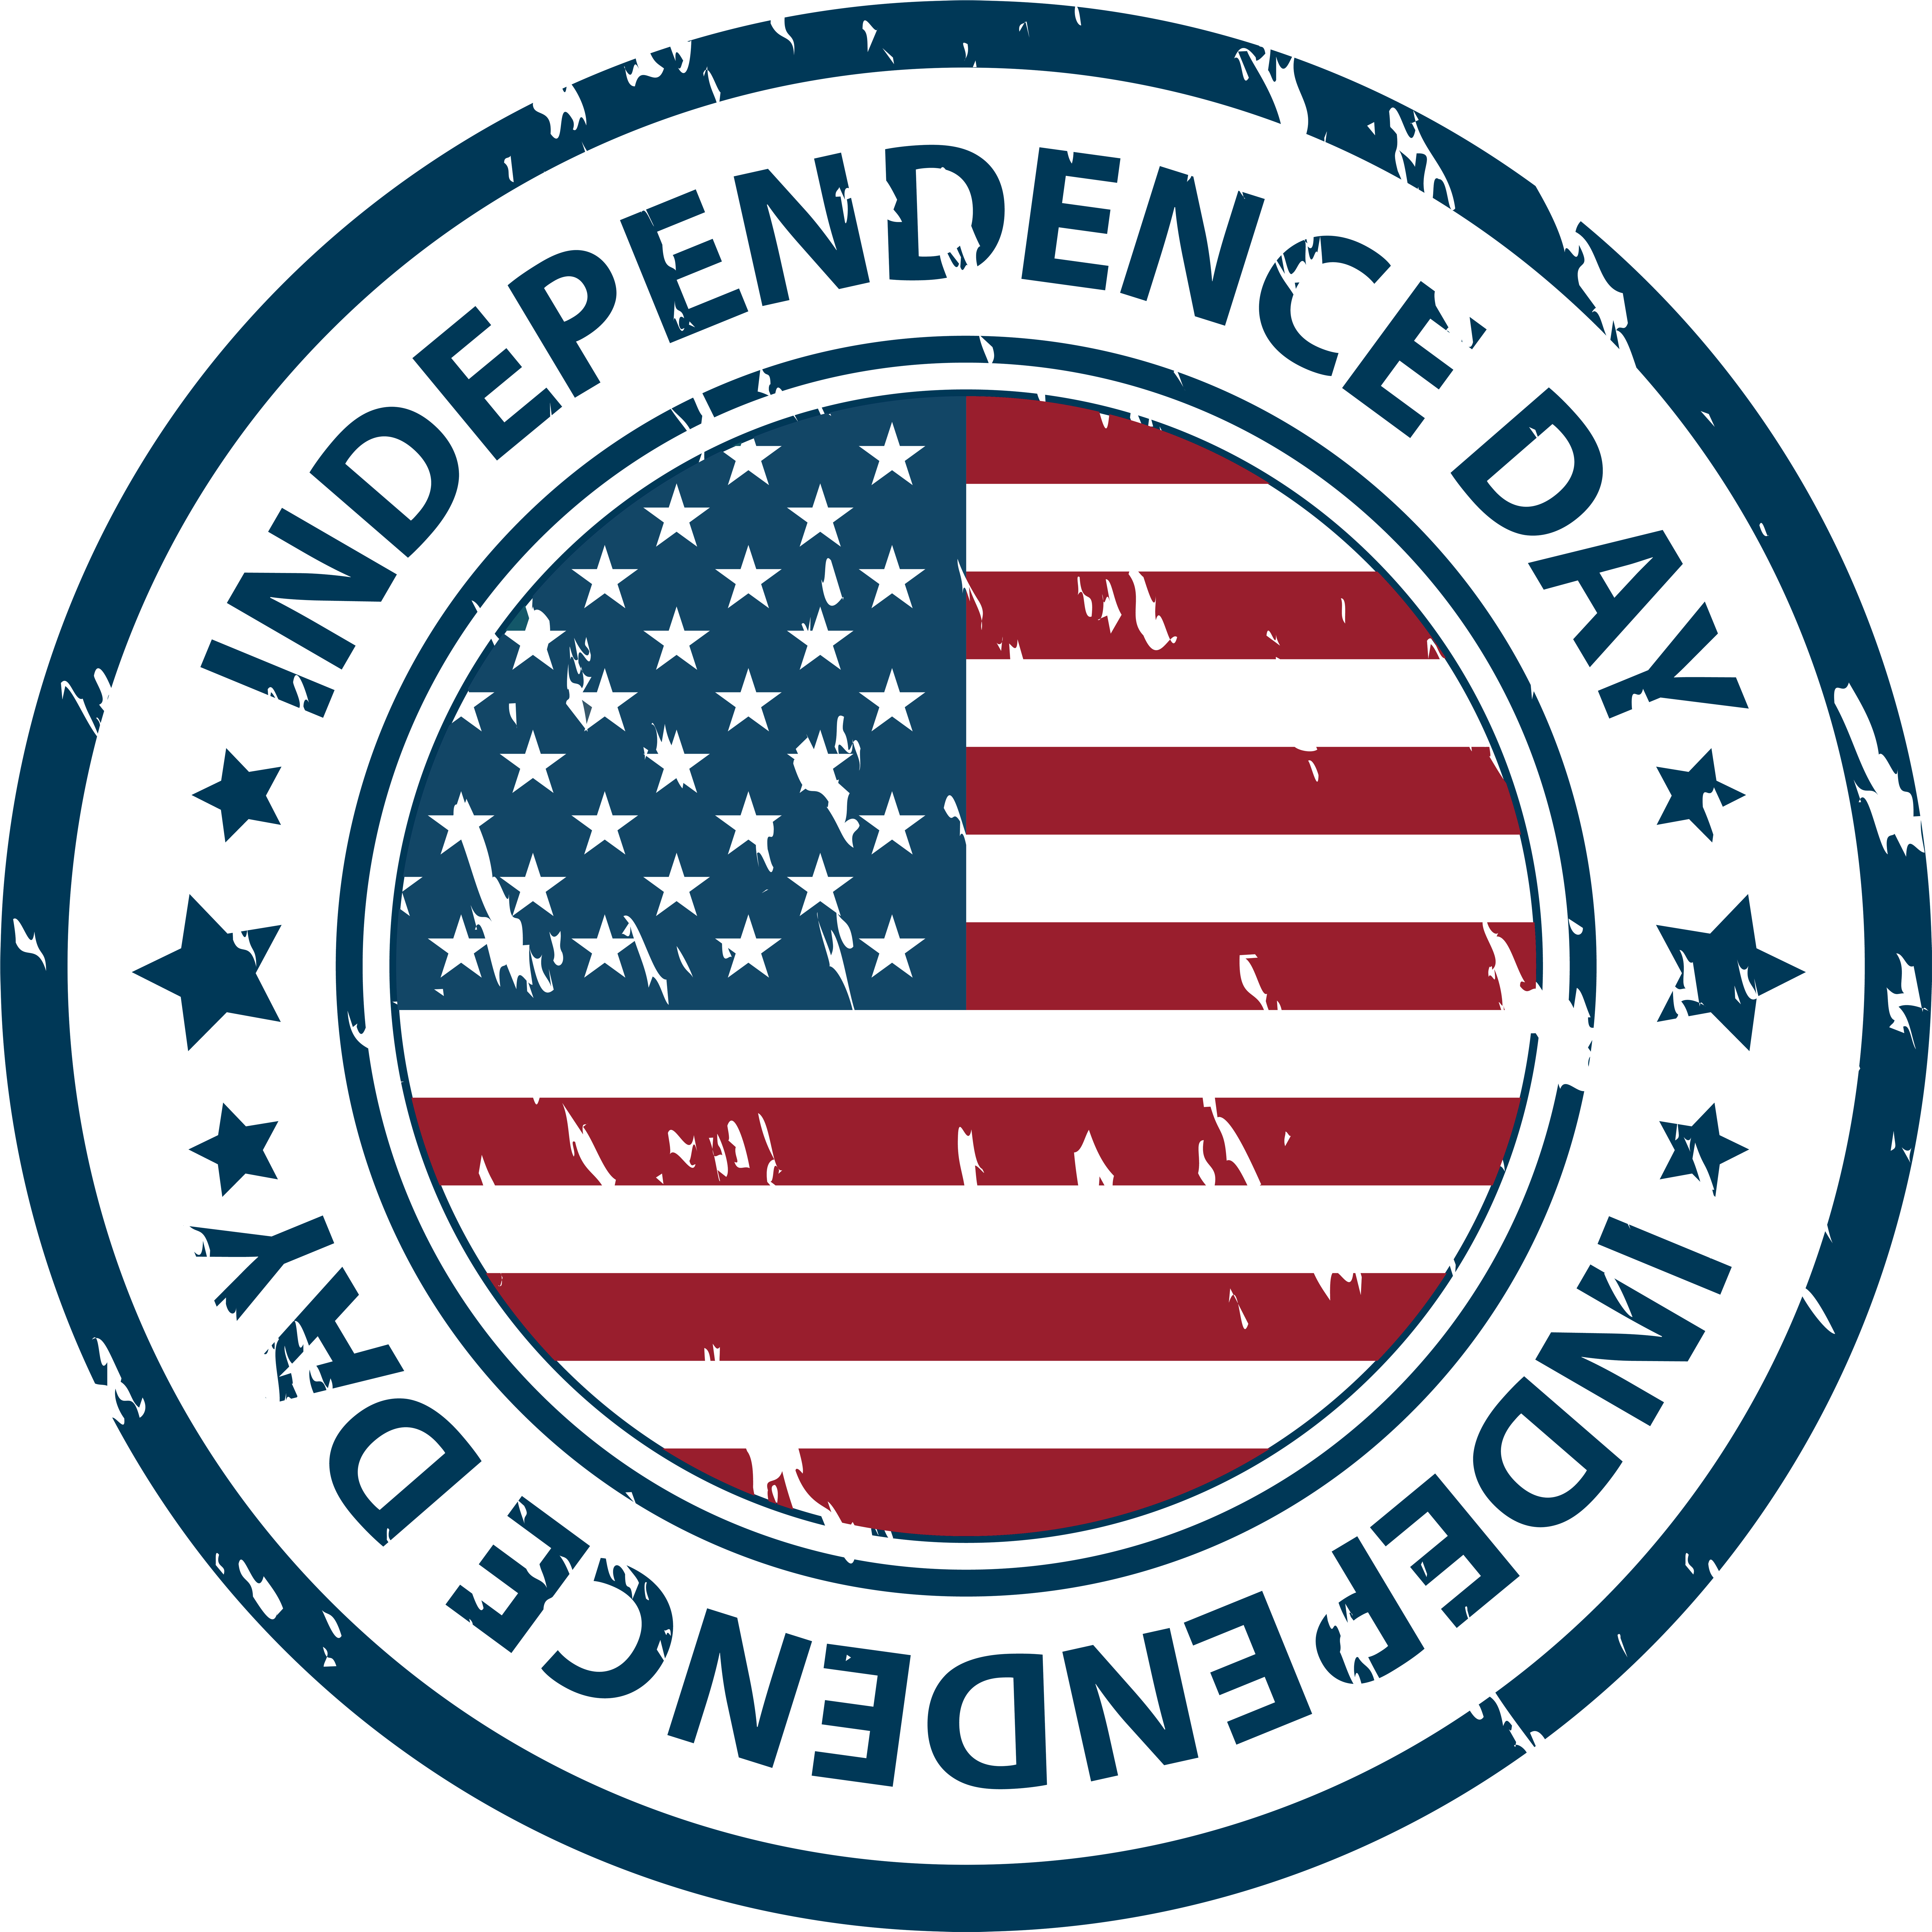 Independence Day Stamp Png Clip Art Image - Independence Day Stamp Png Clip Art Image (8000x8000)